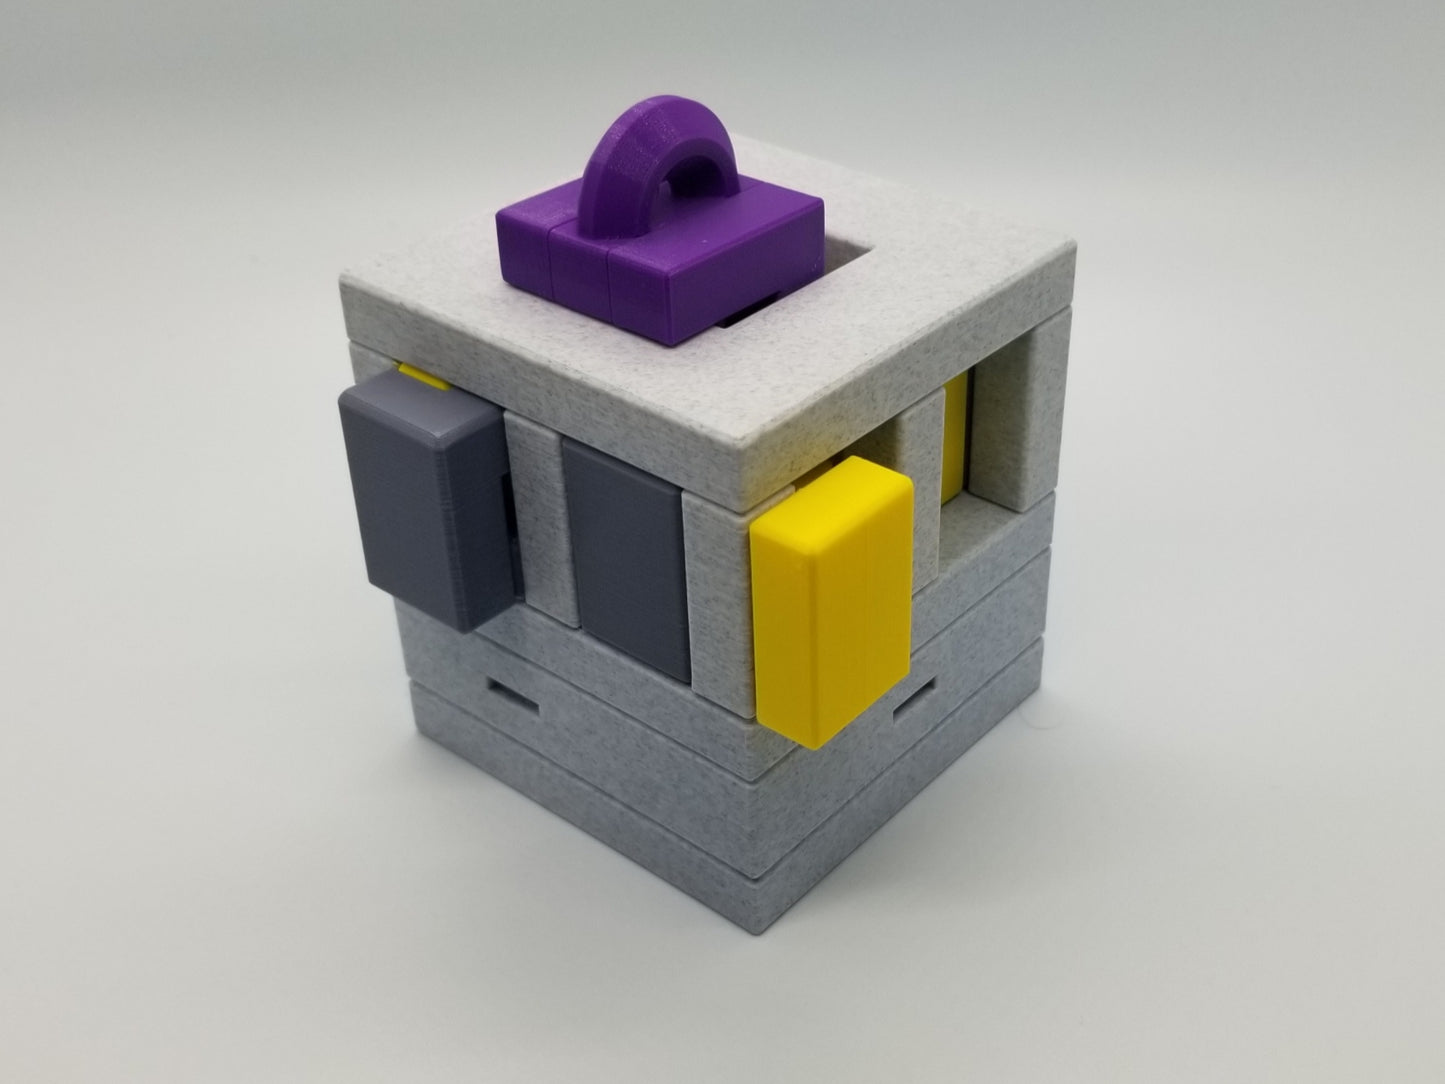 Burr Bot - 3D Printed Burr and Sequential Discovery Puzzle